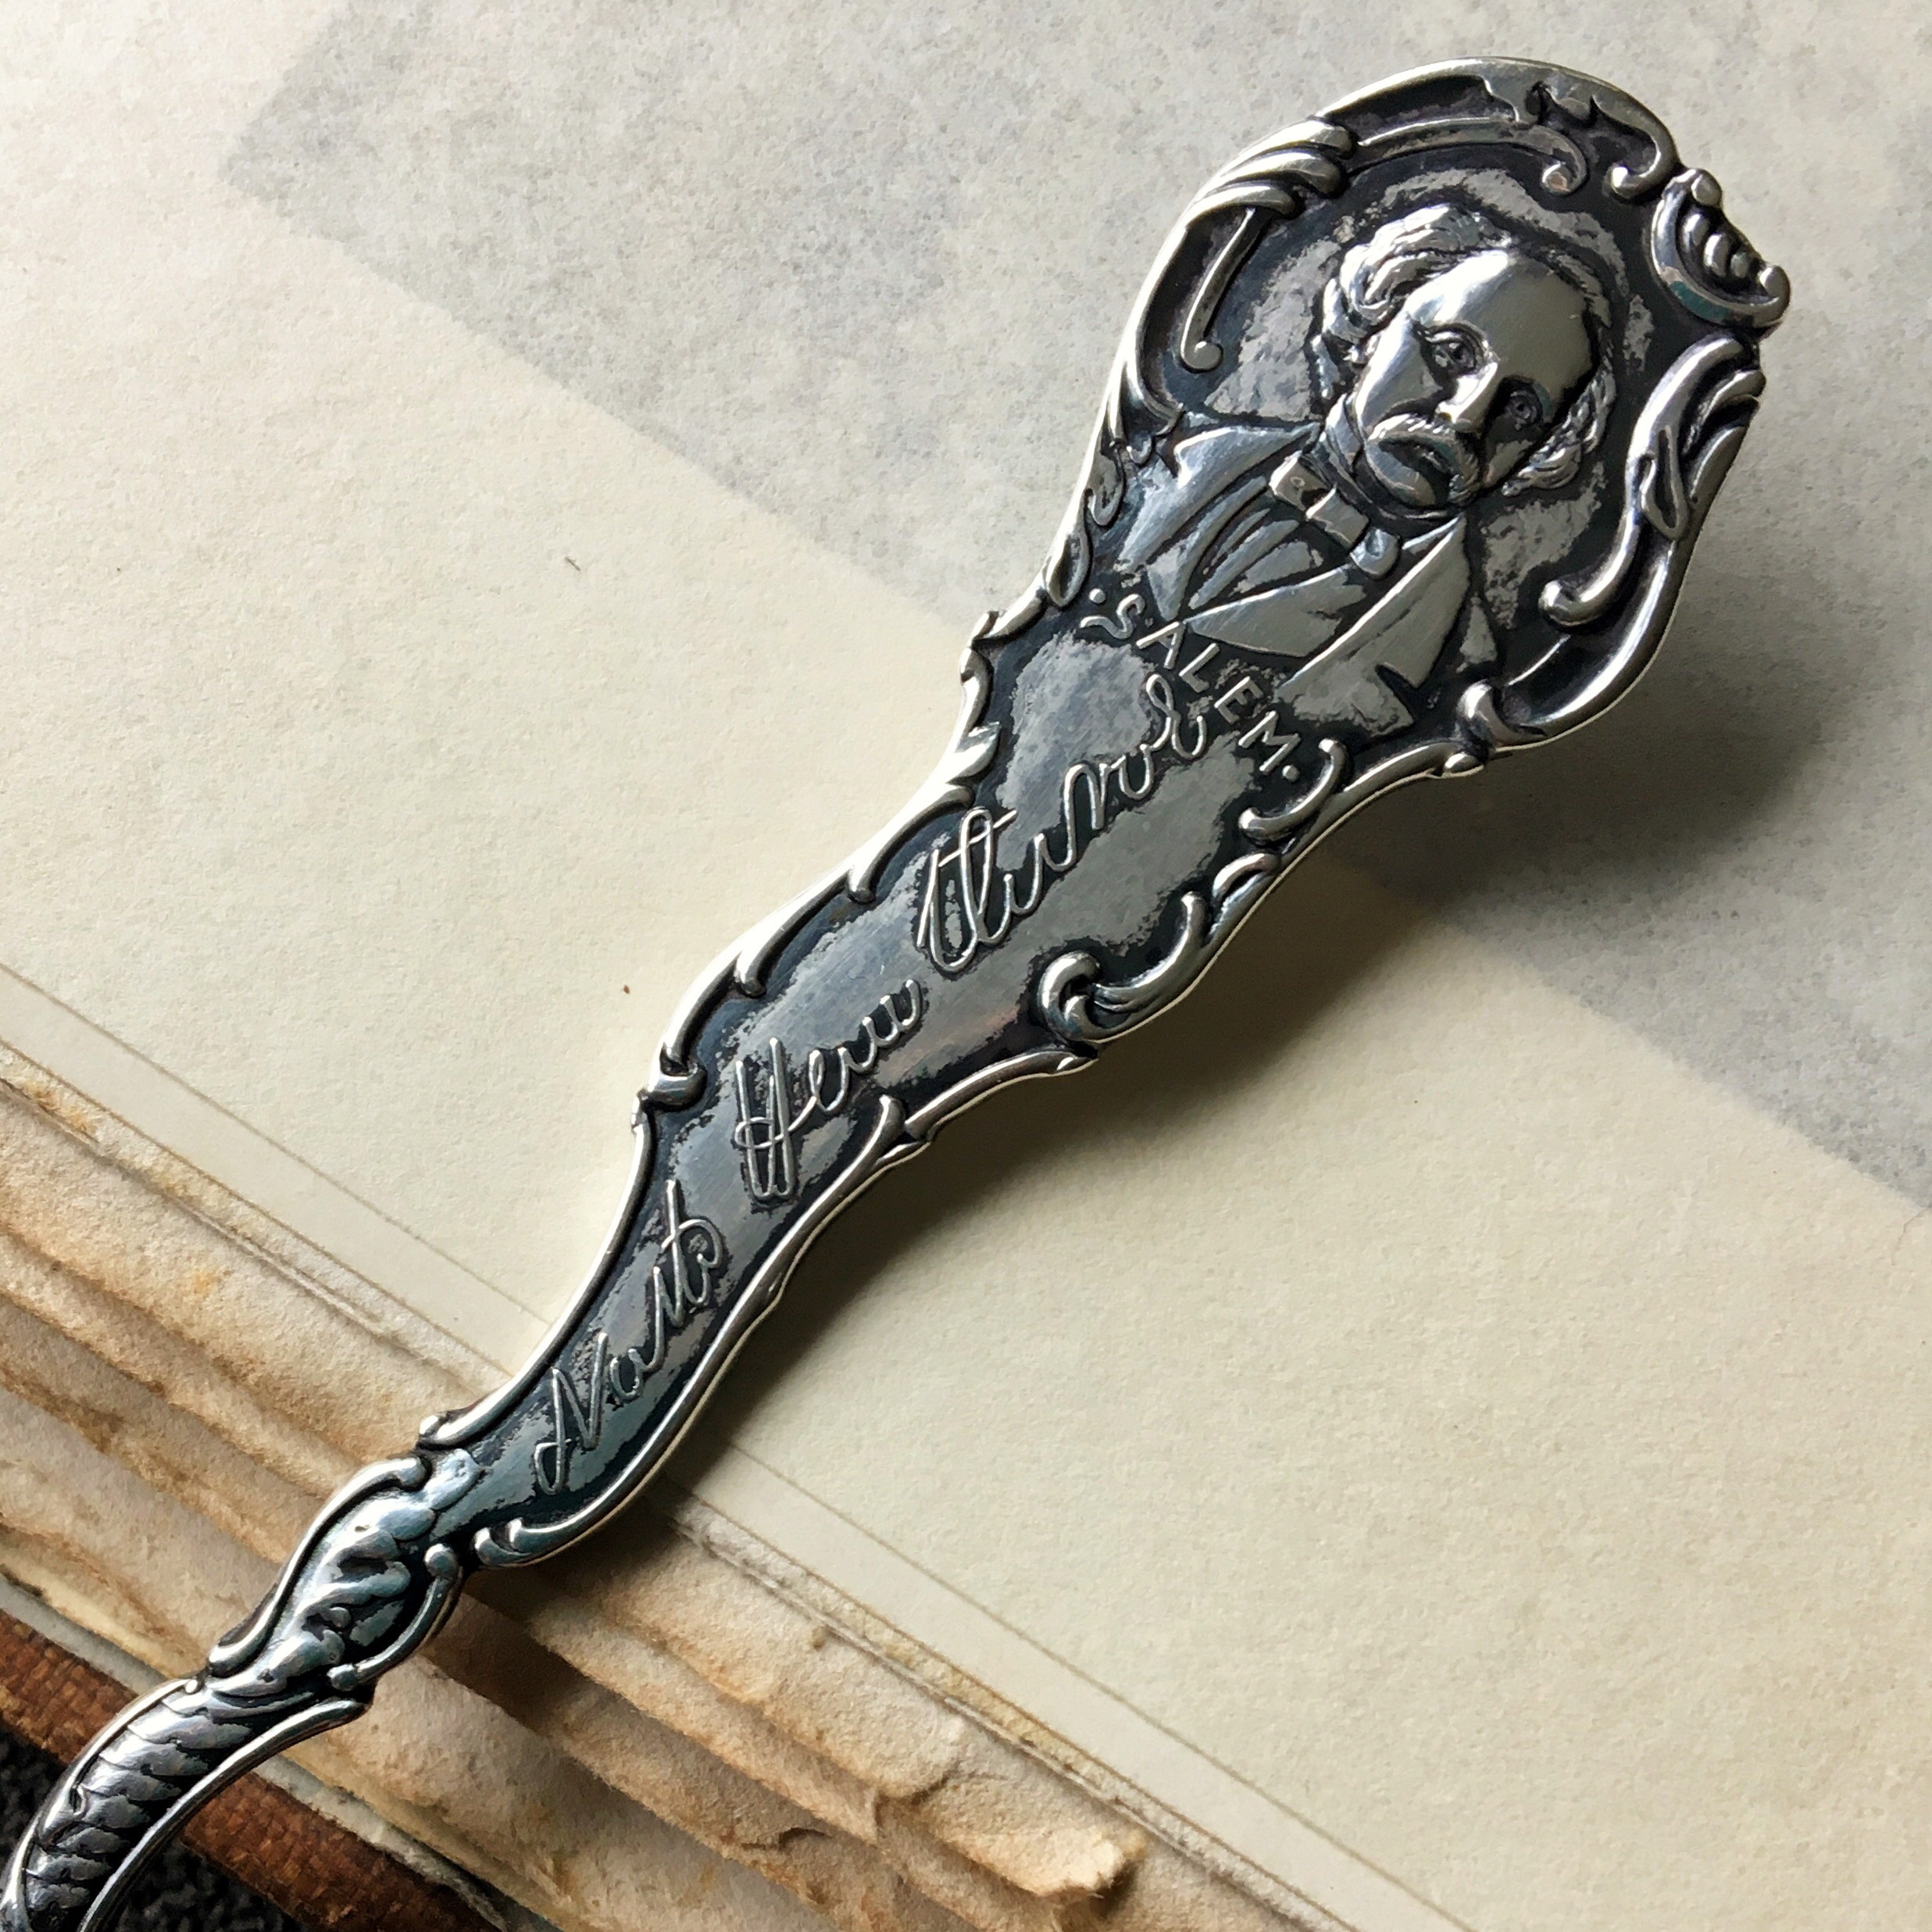 A close-up of the top of the Nathaniel Hawthorne Spoon